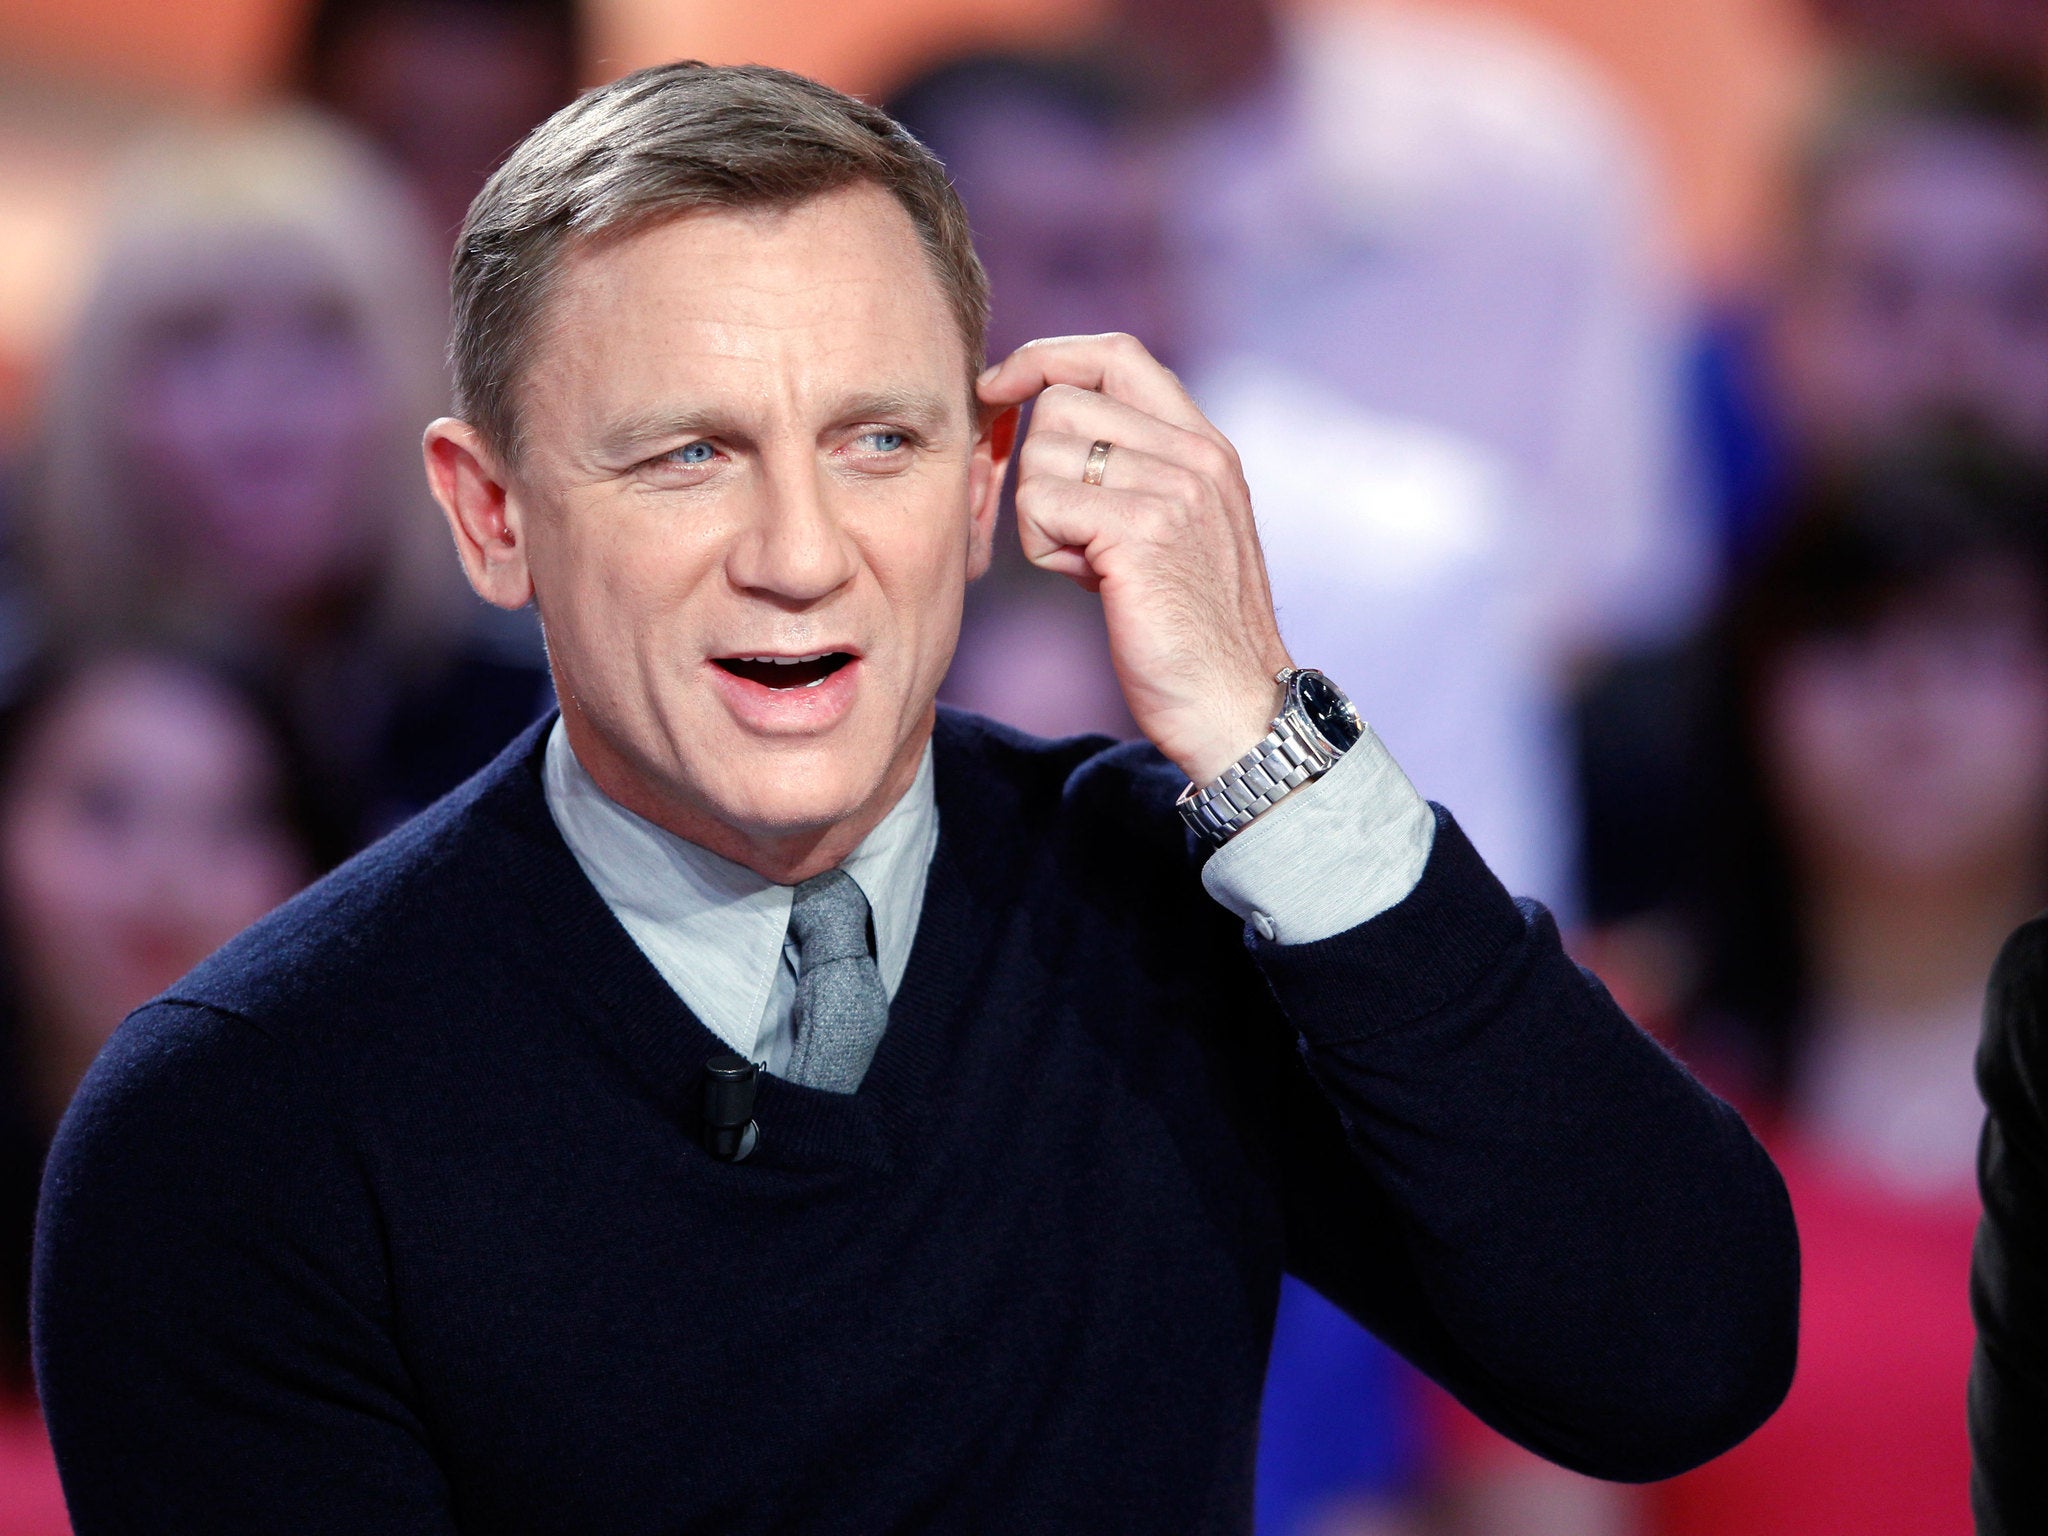 Daniel Craig appearing on French TV wearing a much more tame watch